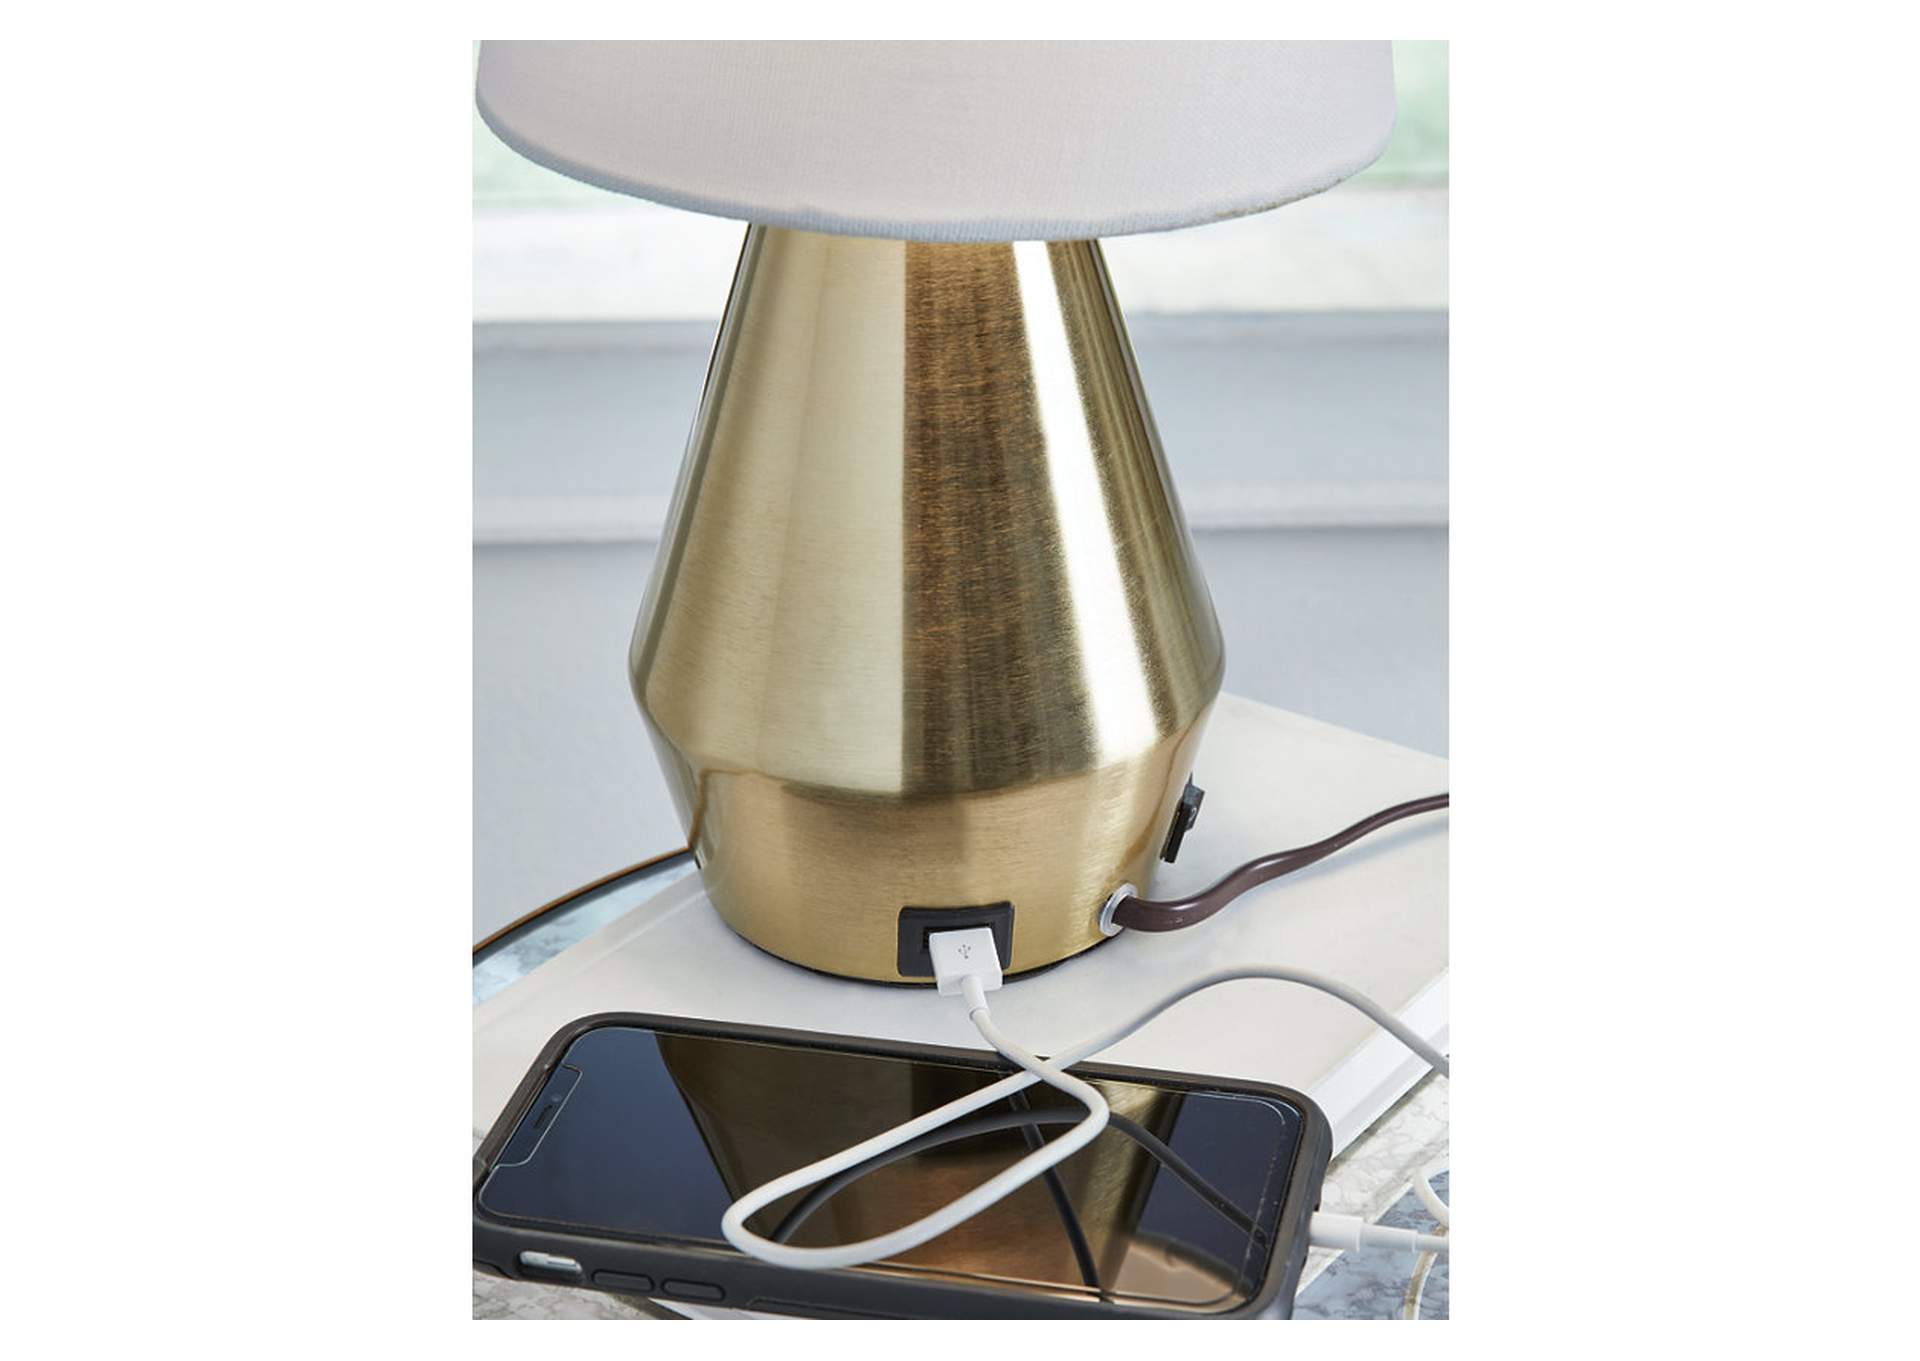 Lanry Table Lamp,Signature Design By Ashley